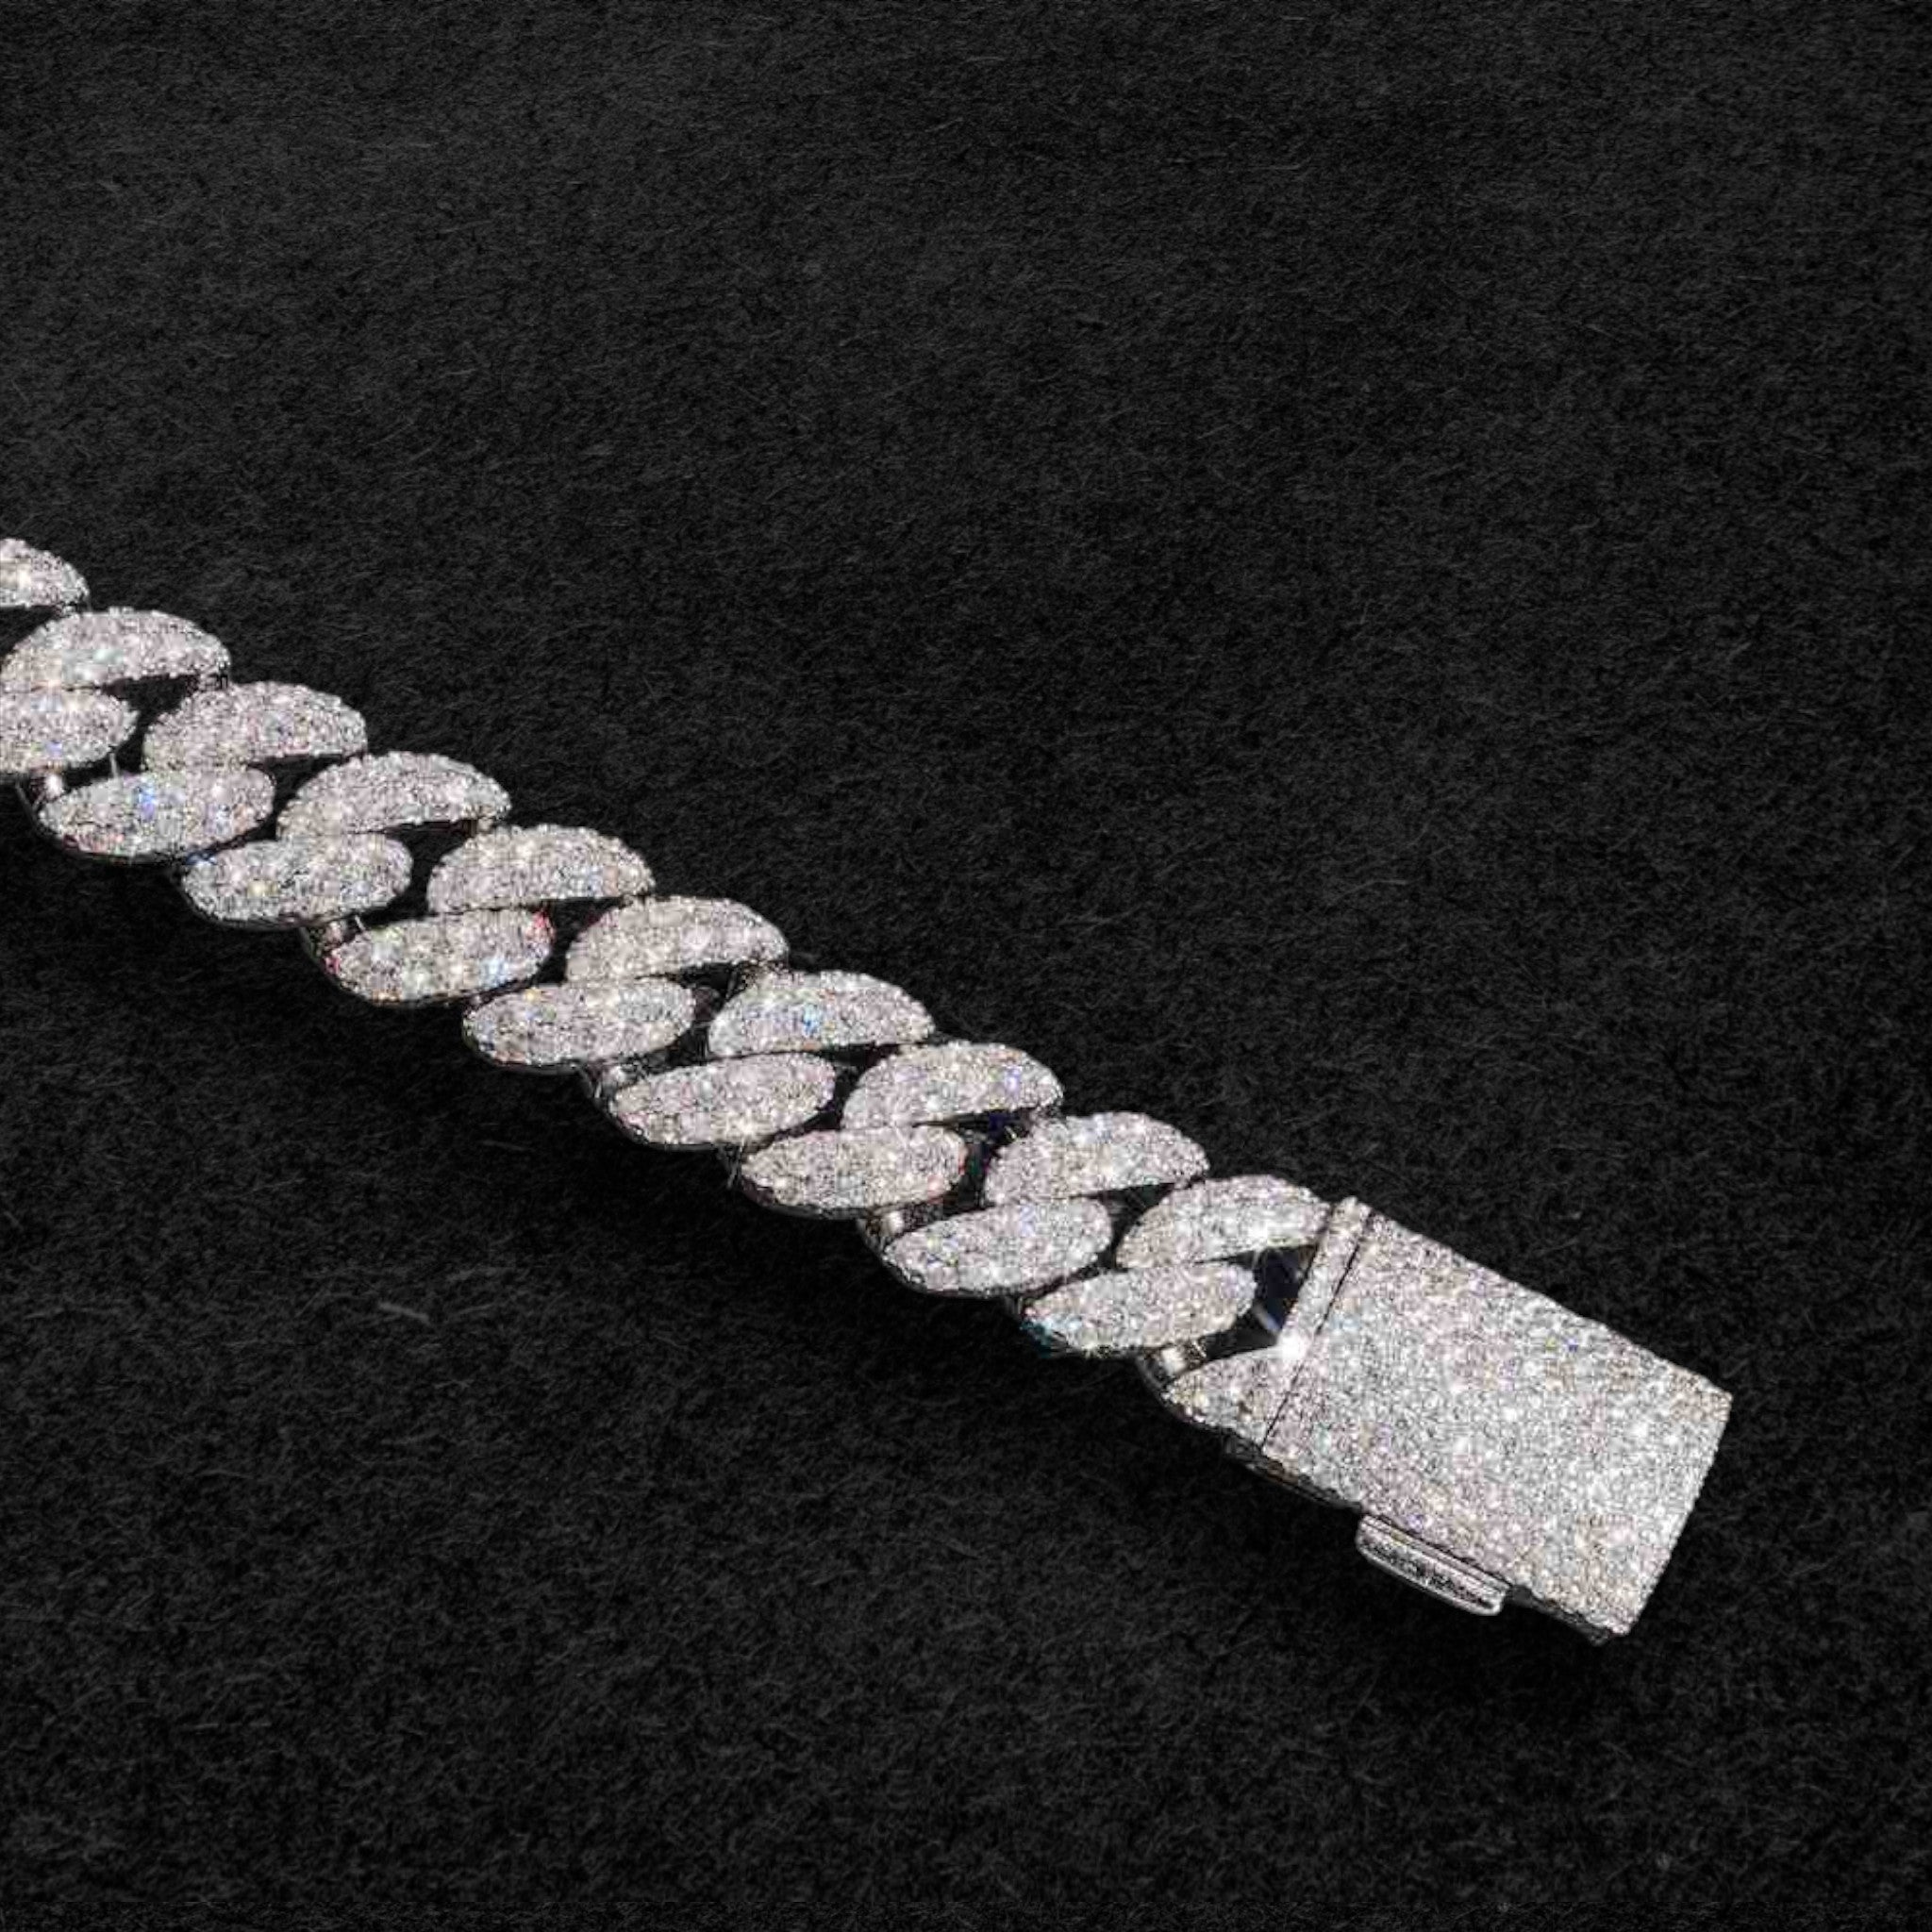 15MM 2-Row Iced Out Miami Cuban Link Bracelet